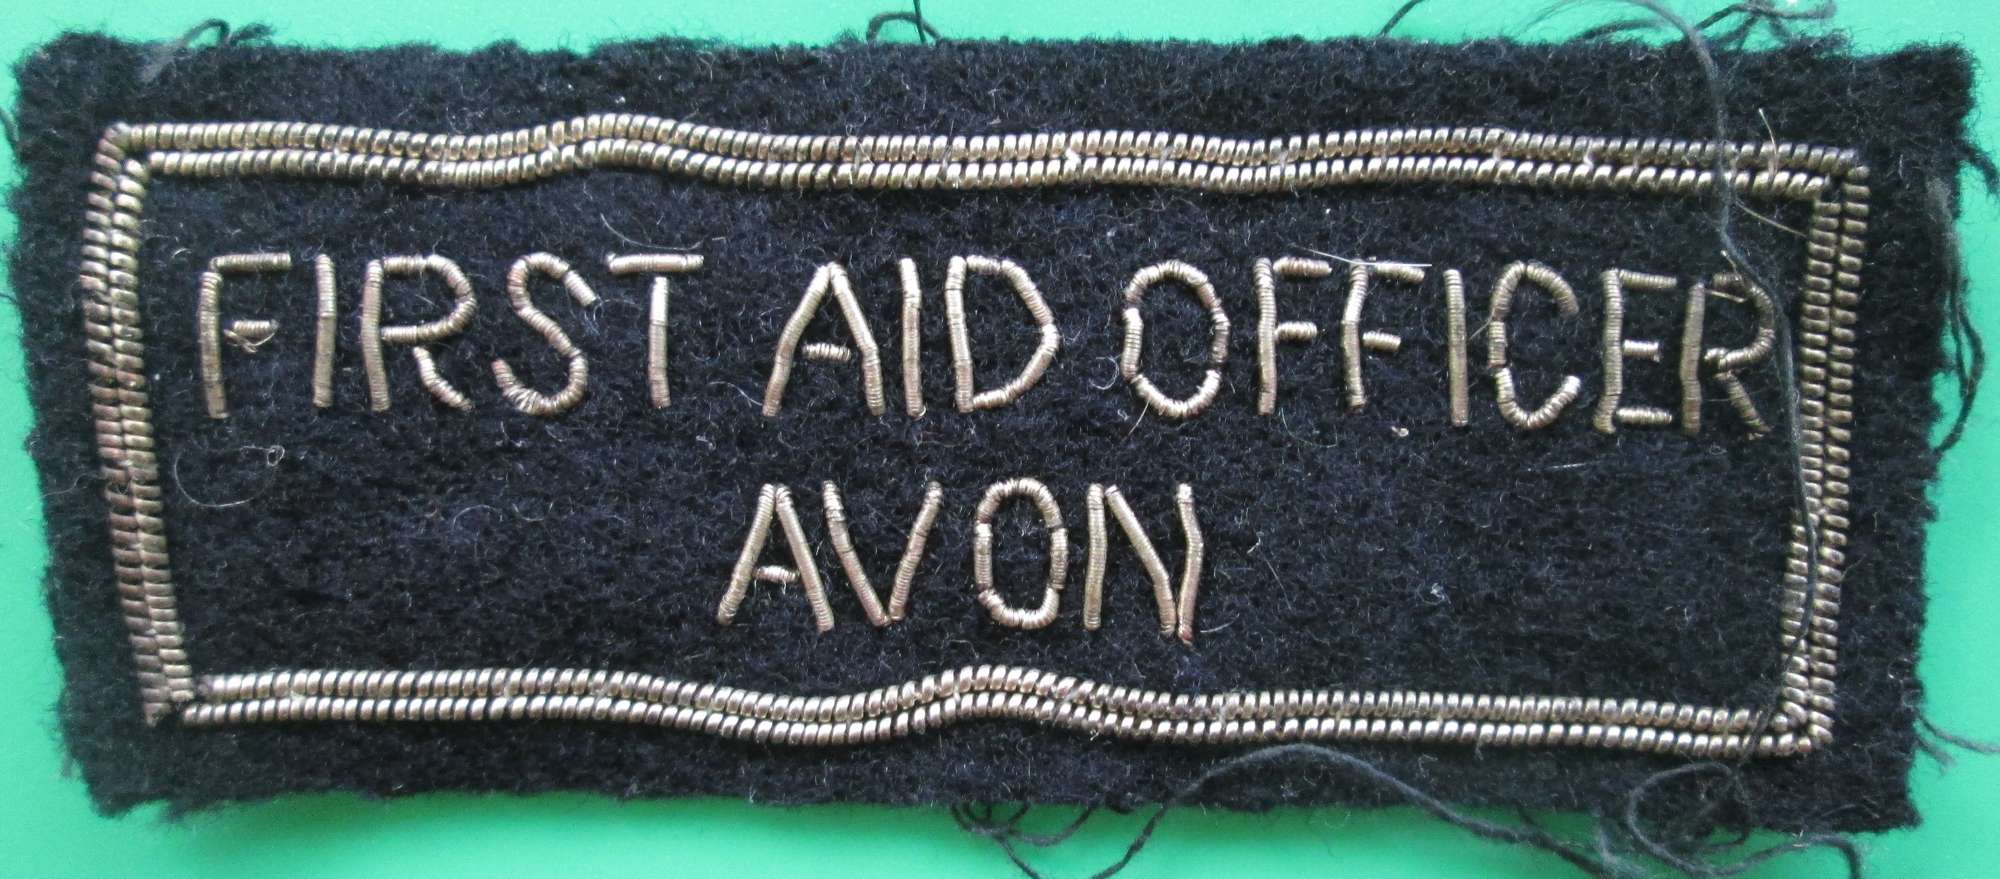 A CIVIL DEFENCE ARM BADGE FOR A FIRST AID OFFICER IN AVON